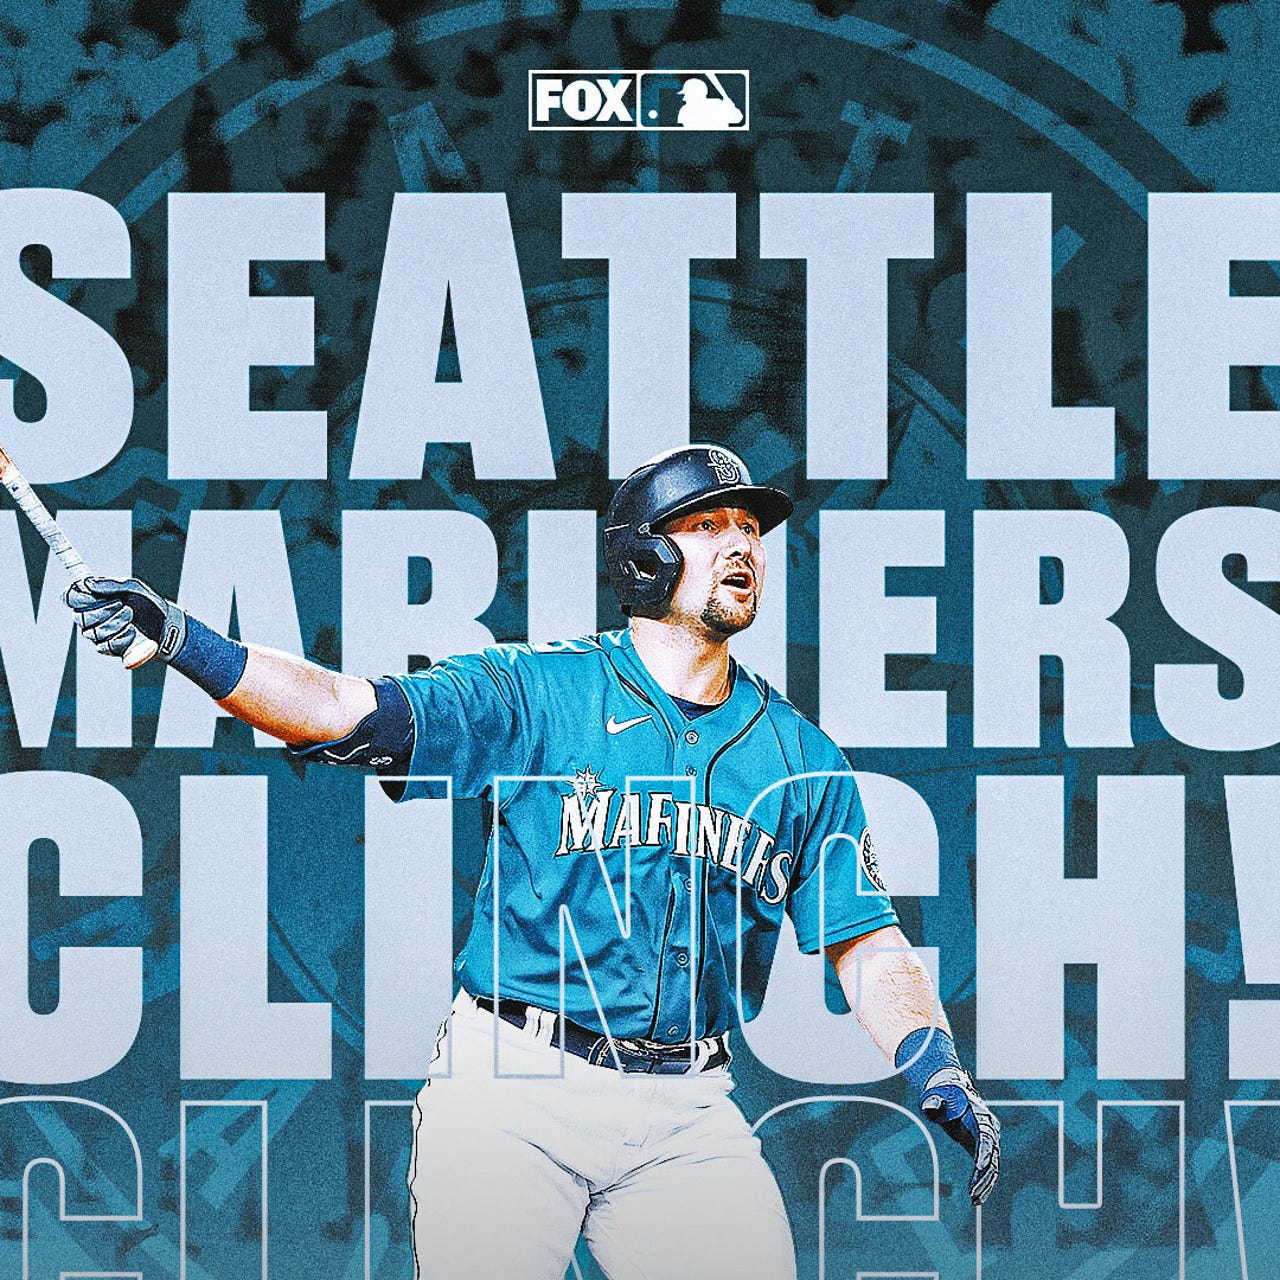 Mariners' clinch celebration a magical moment for Seattle players